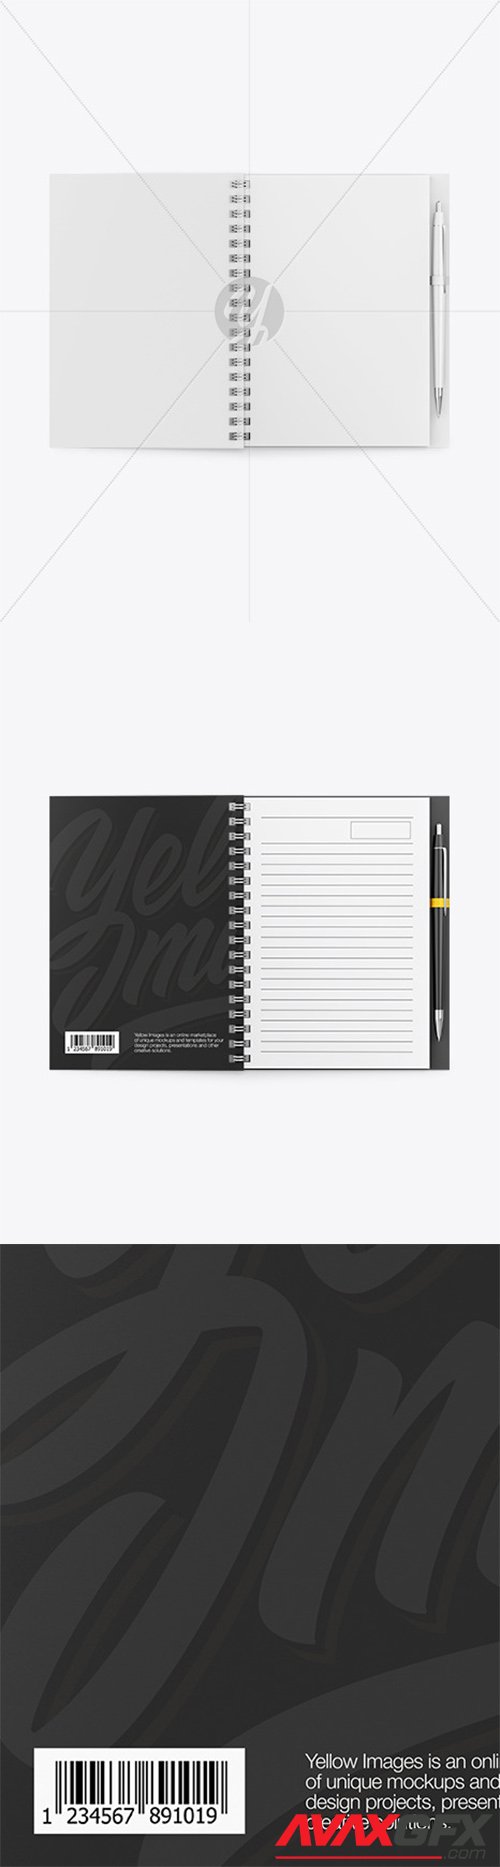 Notebook With Writing Pen Mockup 79143 TIF